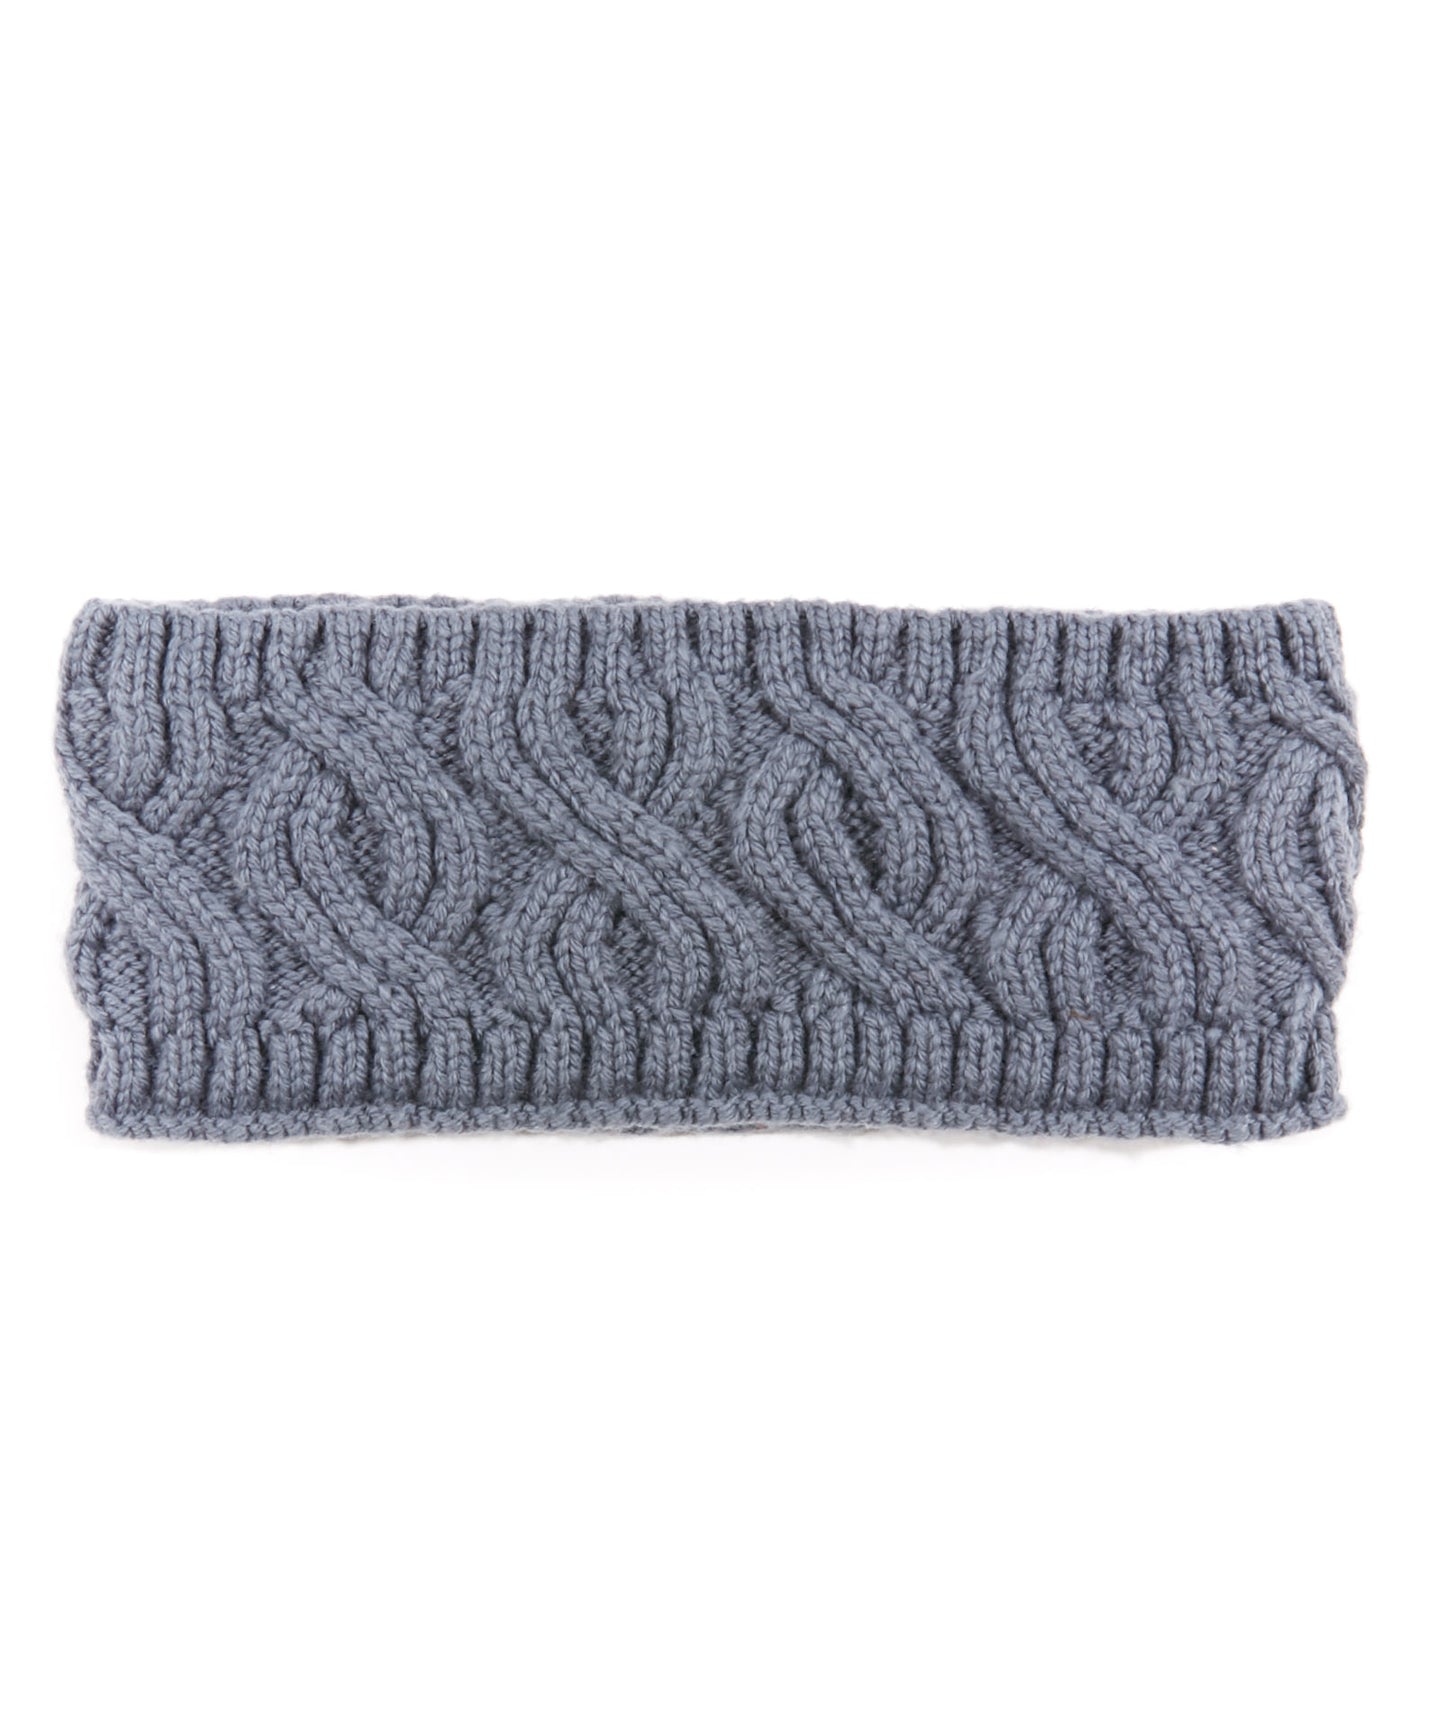 Recycled Headband in color Denim Blue